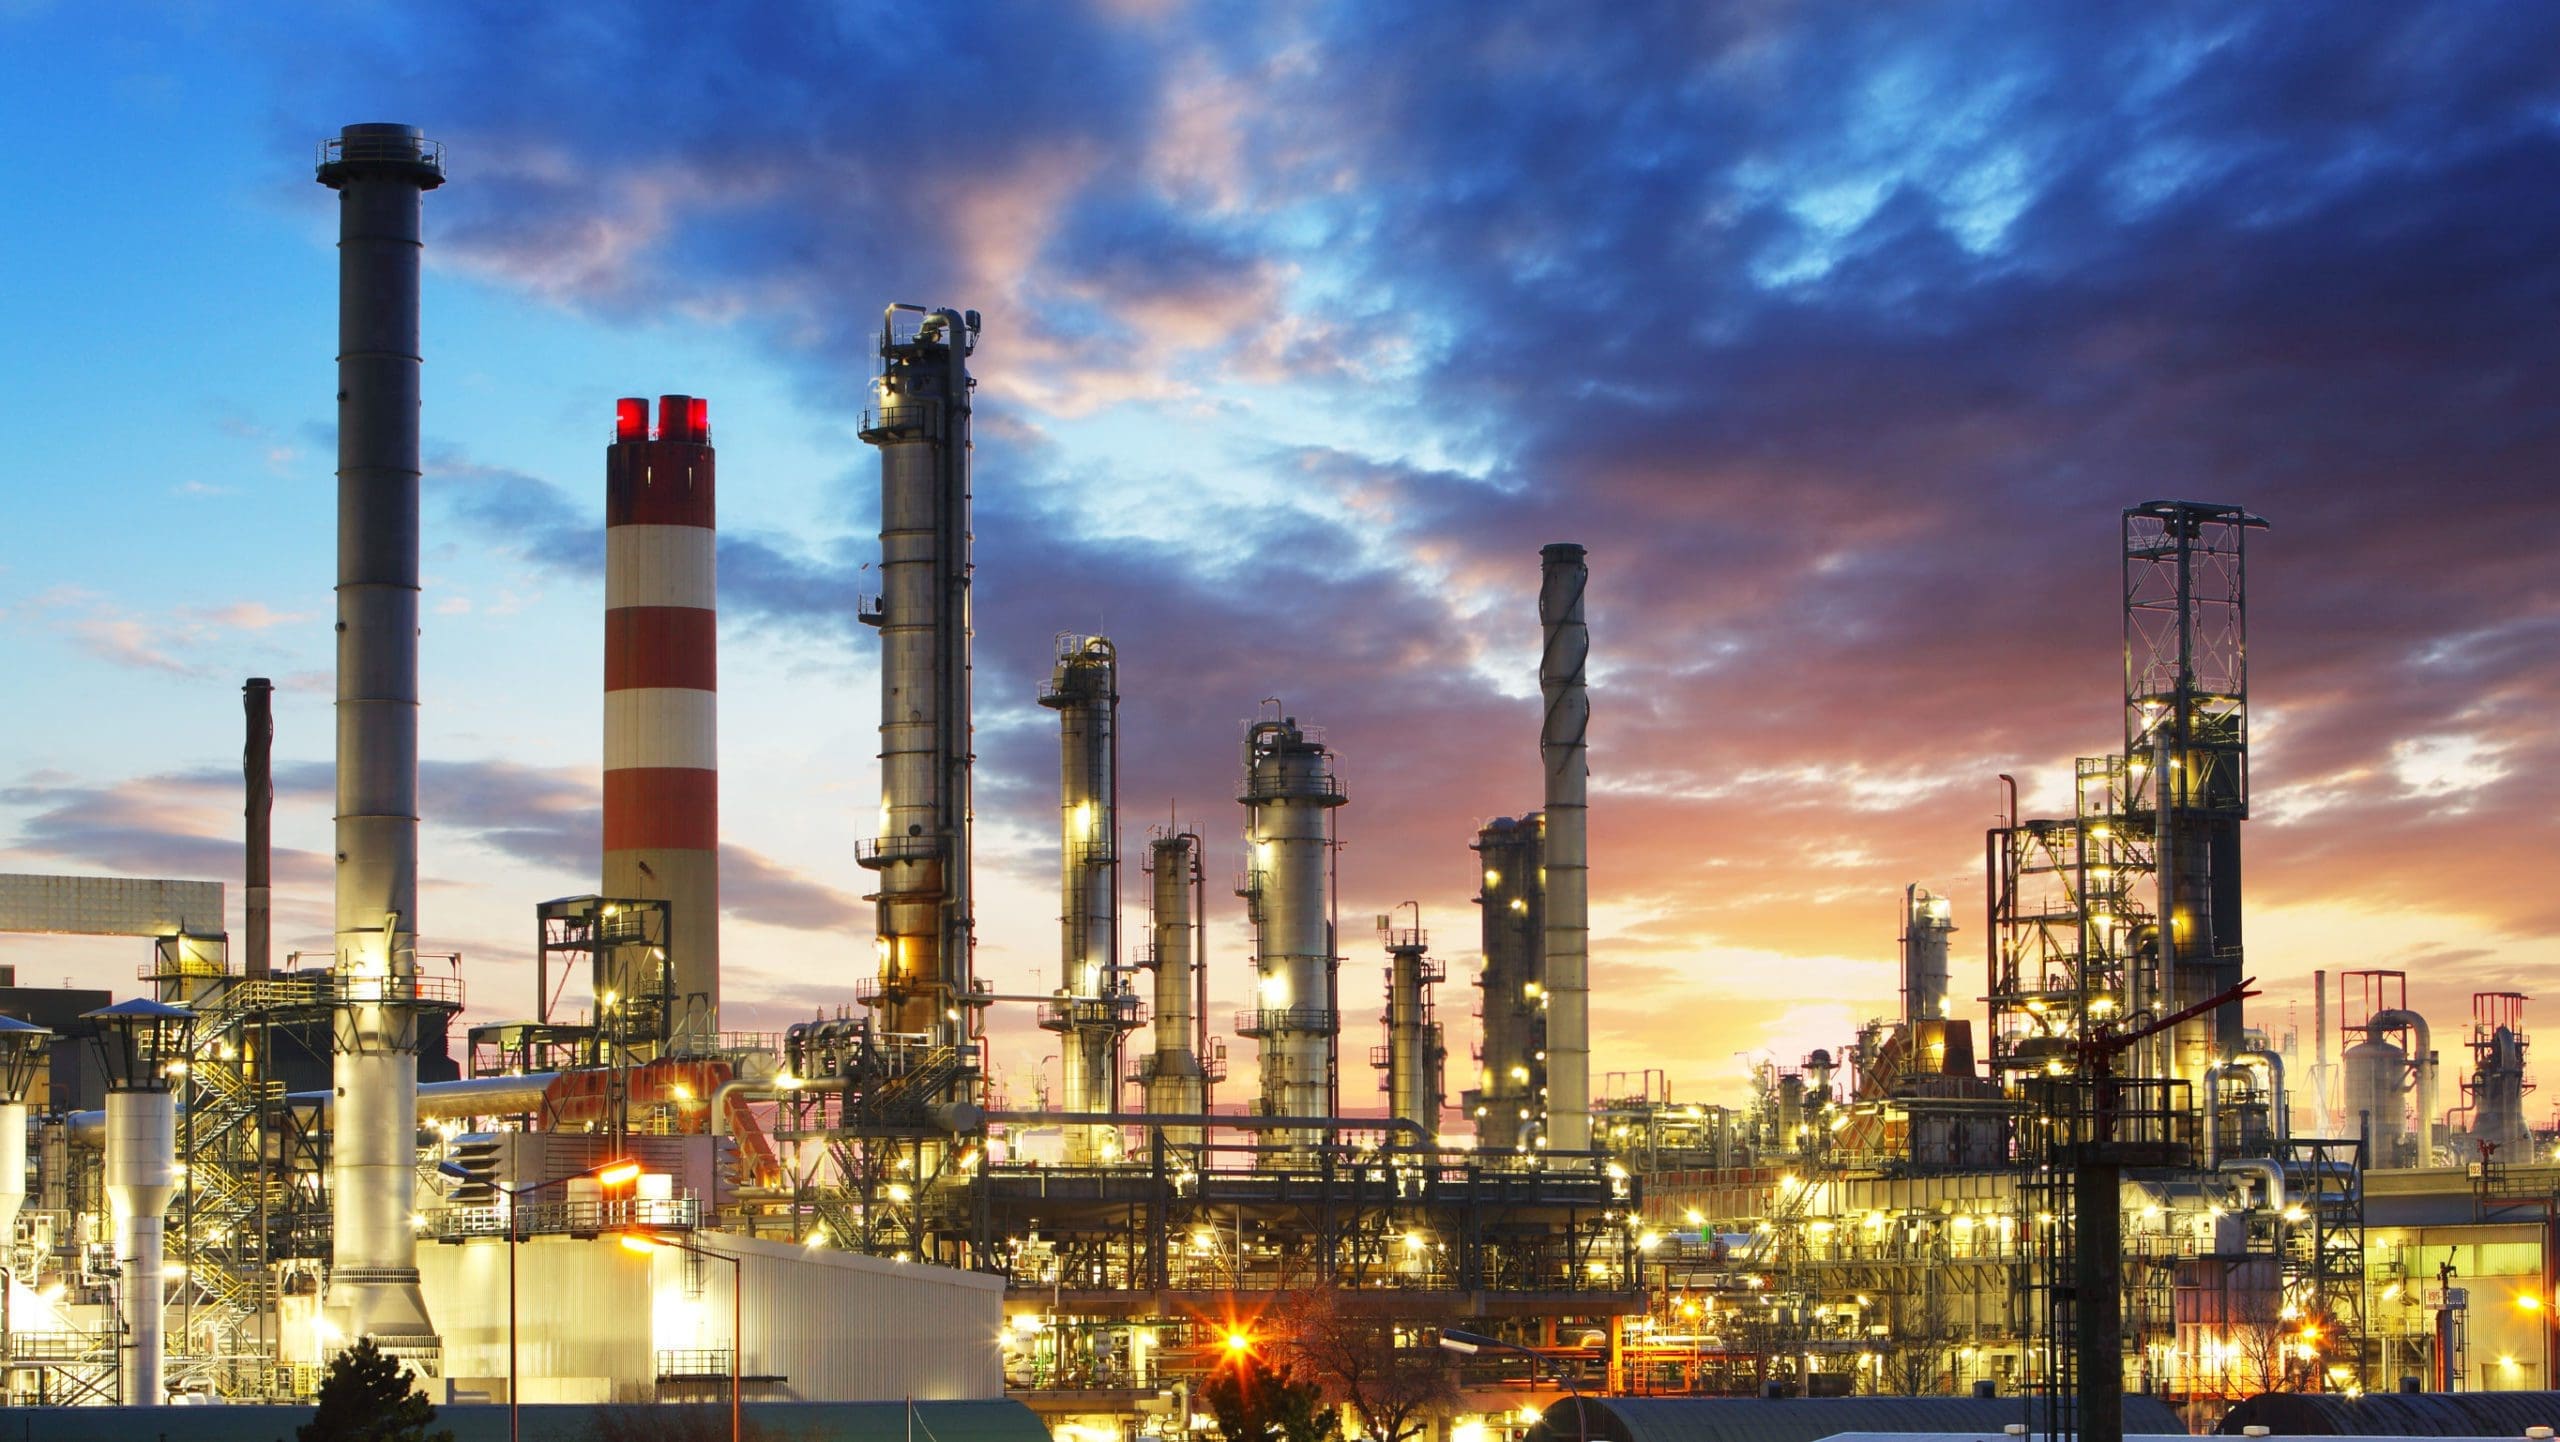 Why Global Refineries Are Focusing on Upgrading and Modernizing Existing Plants